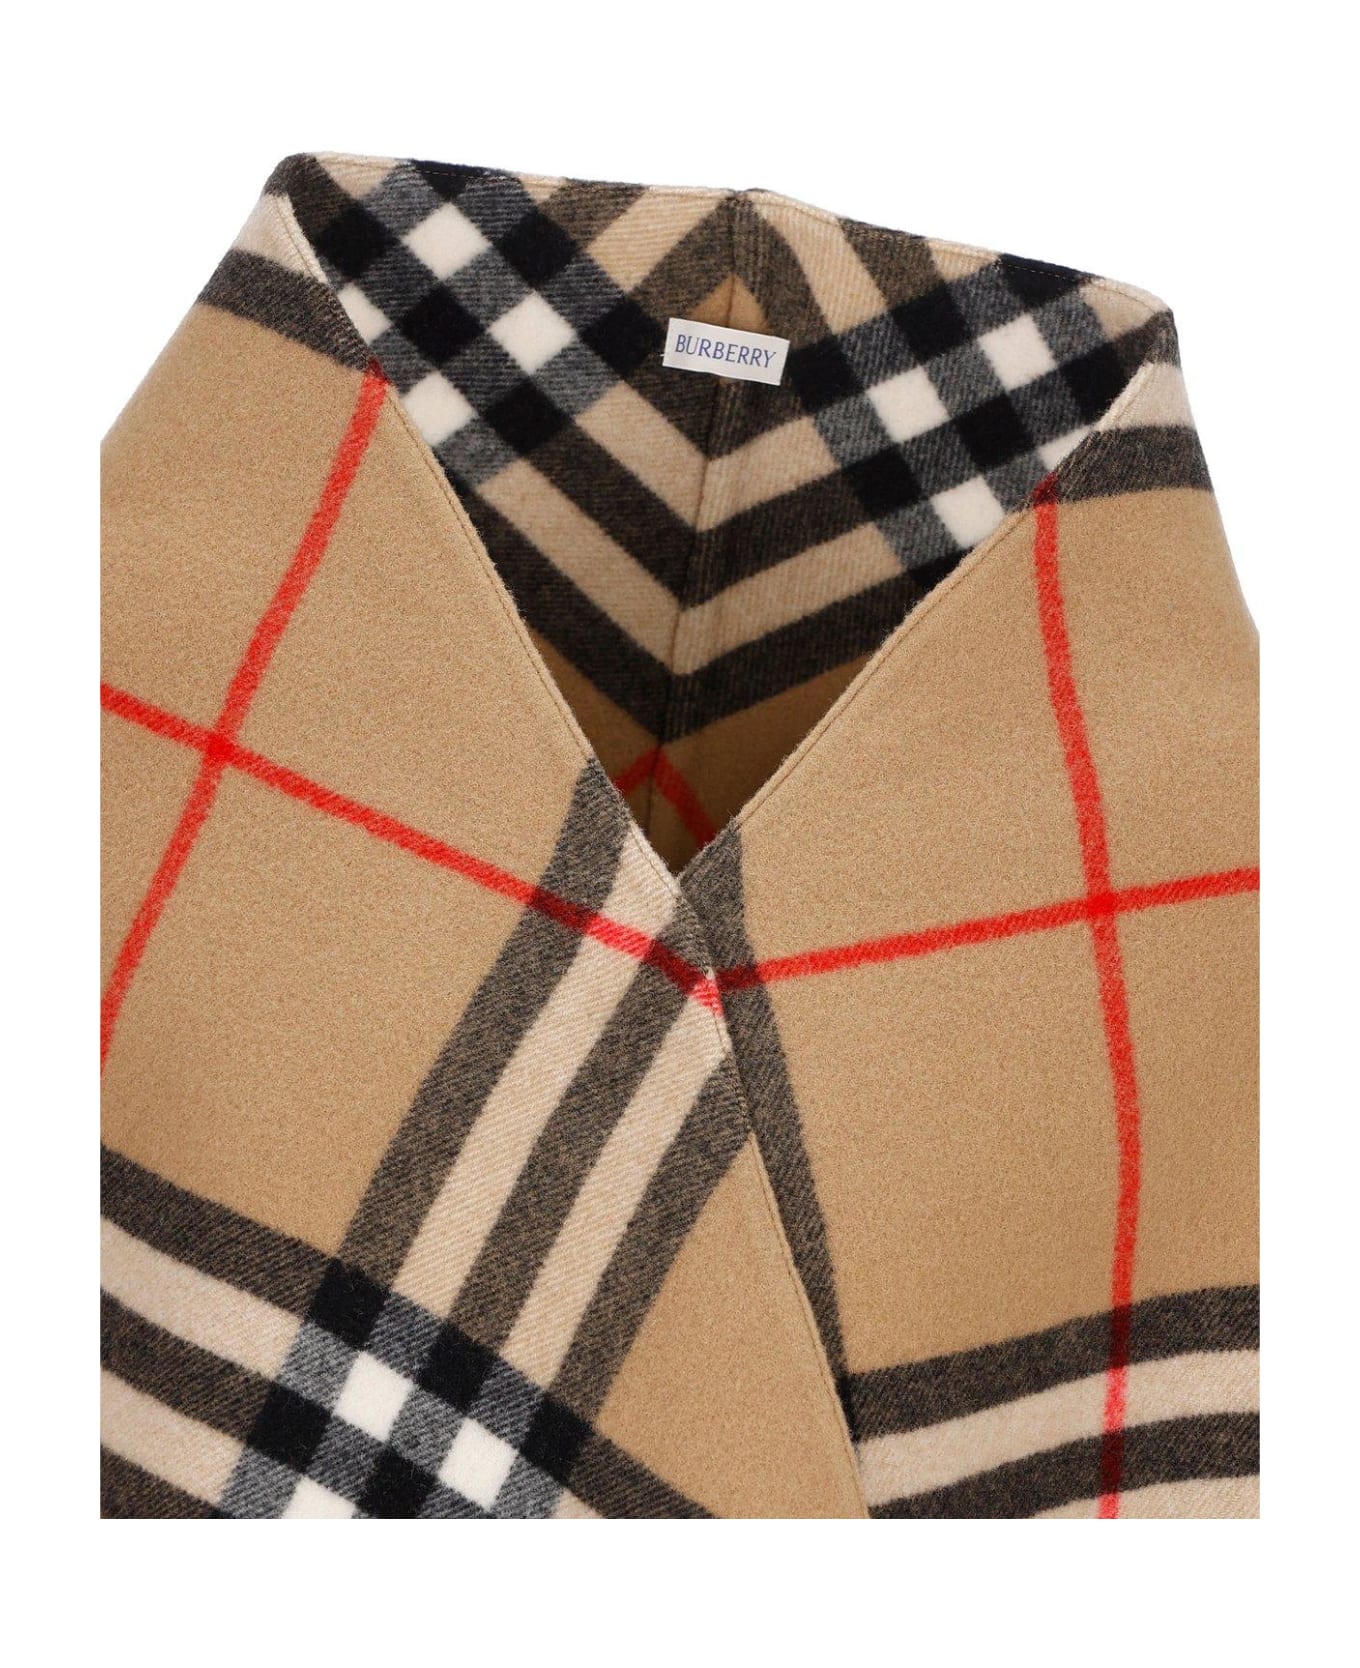 Burberry Check Printed Fringed Cape - Archive Beige スカーフ＆ストール